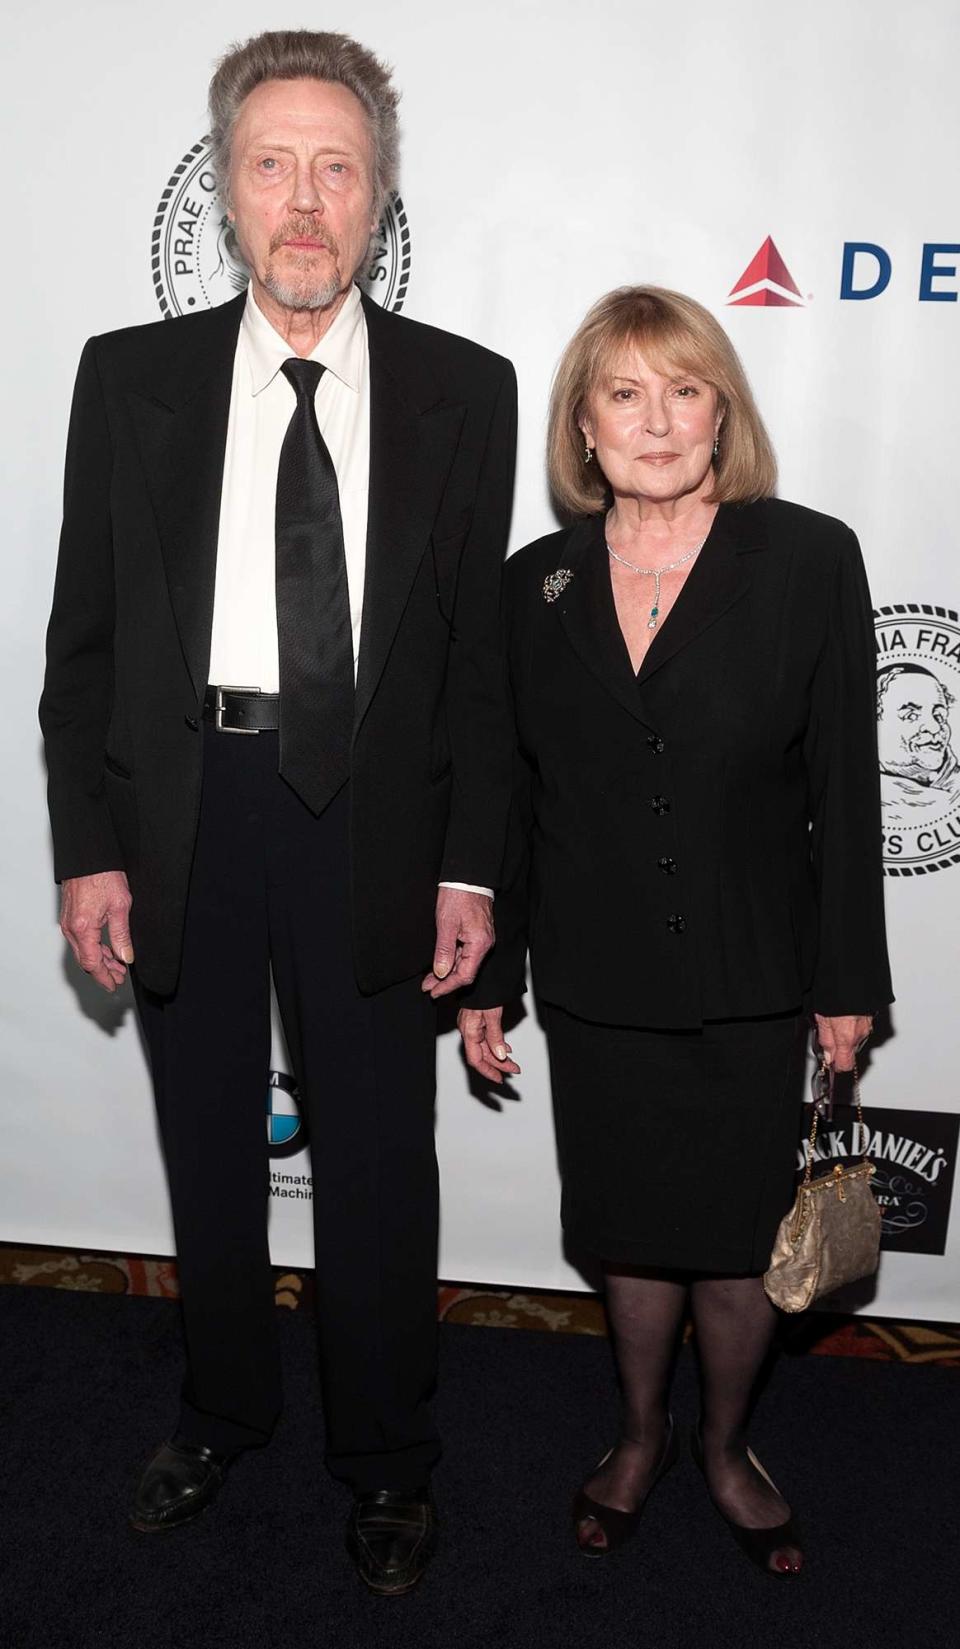 Christopher Walken (L) and Georgianne Walken attend the Friars Foundation Gala honoring Robert De Niro and Carlos Slim at The Waldorf=Astoria on October 7, 2014 in New York City